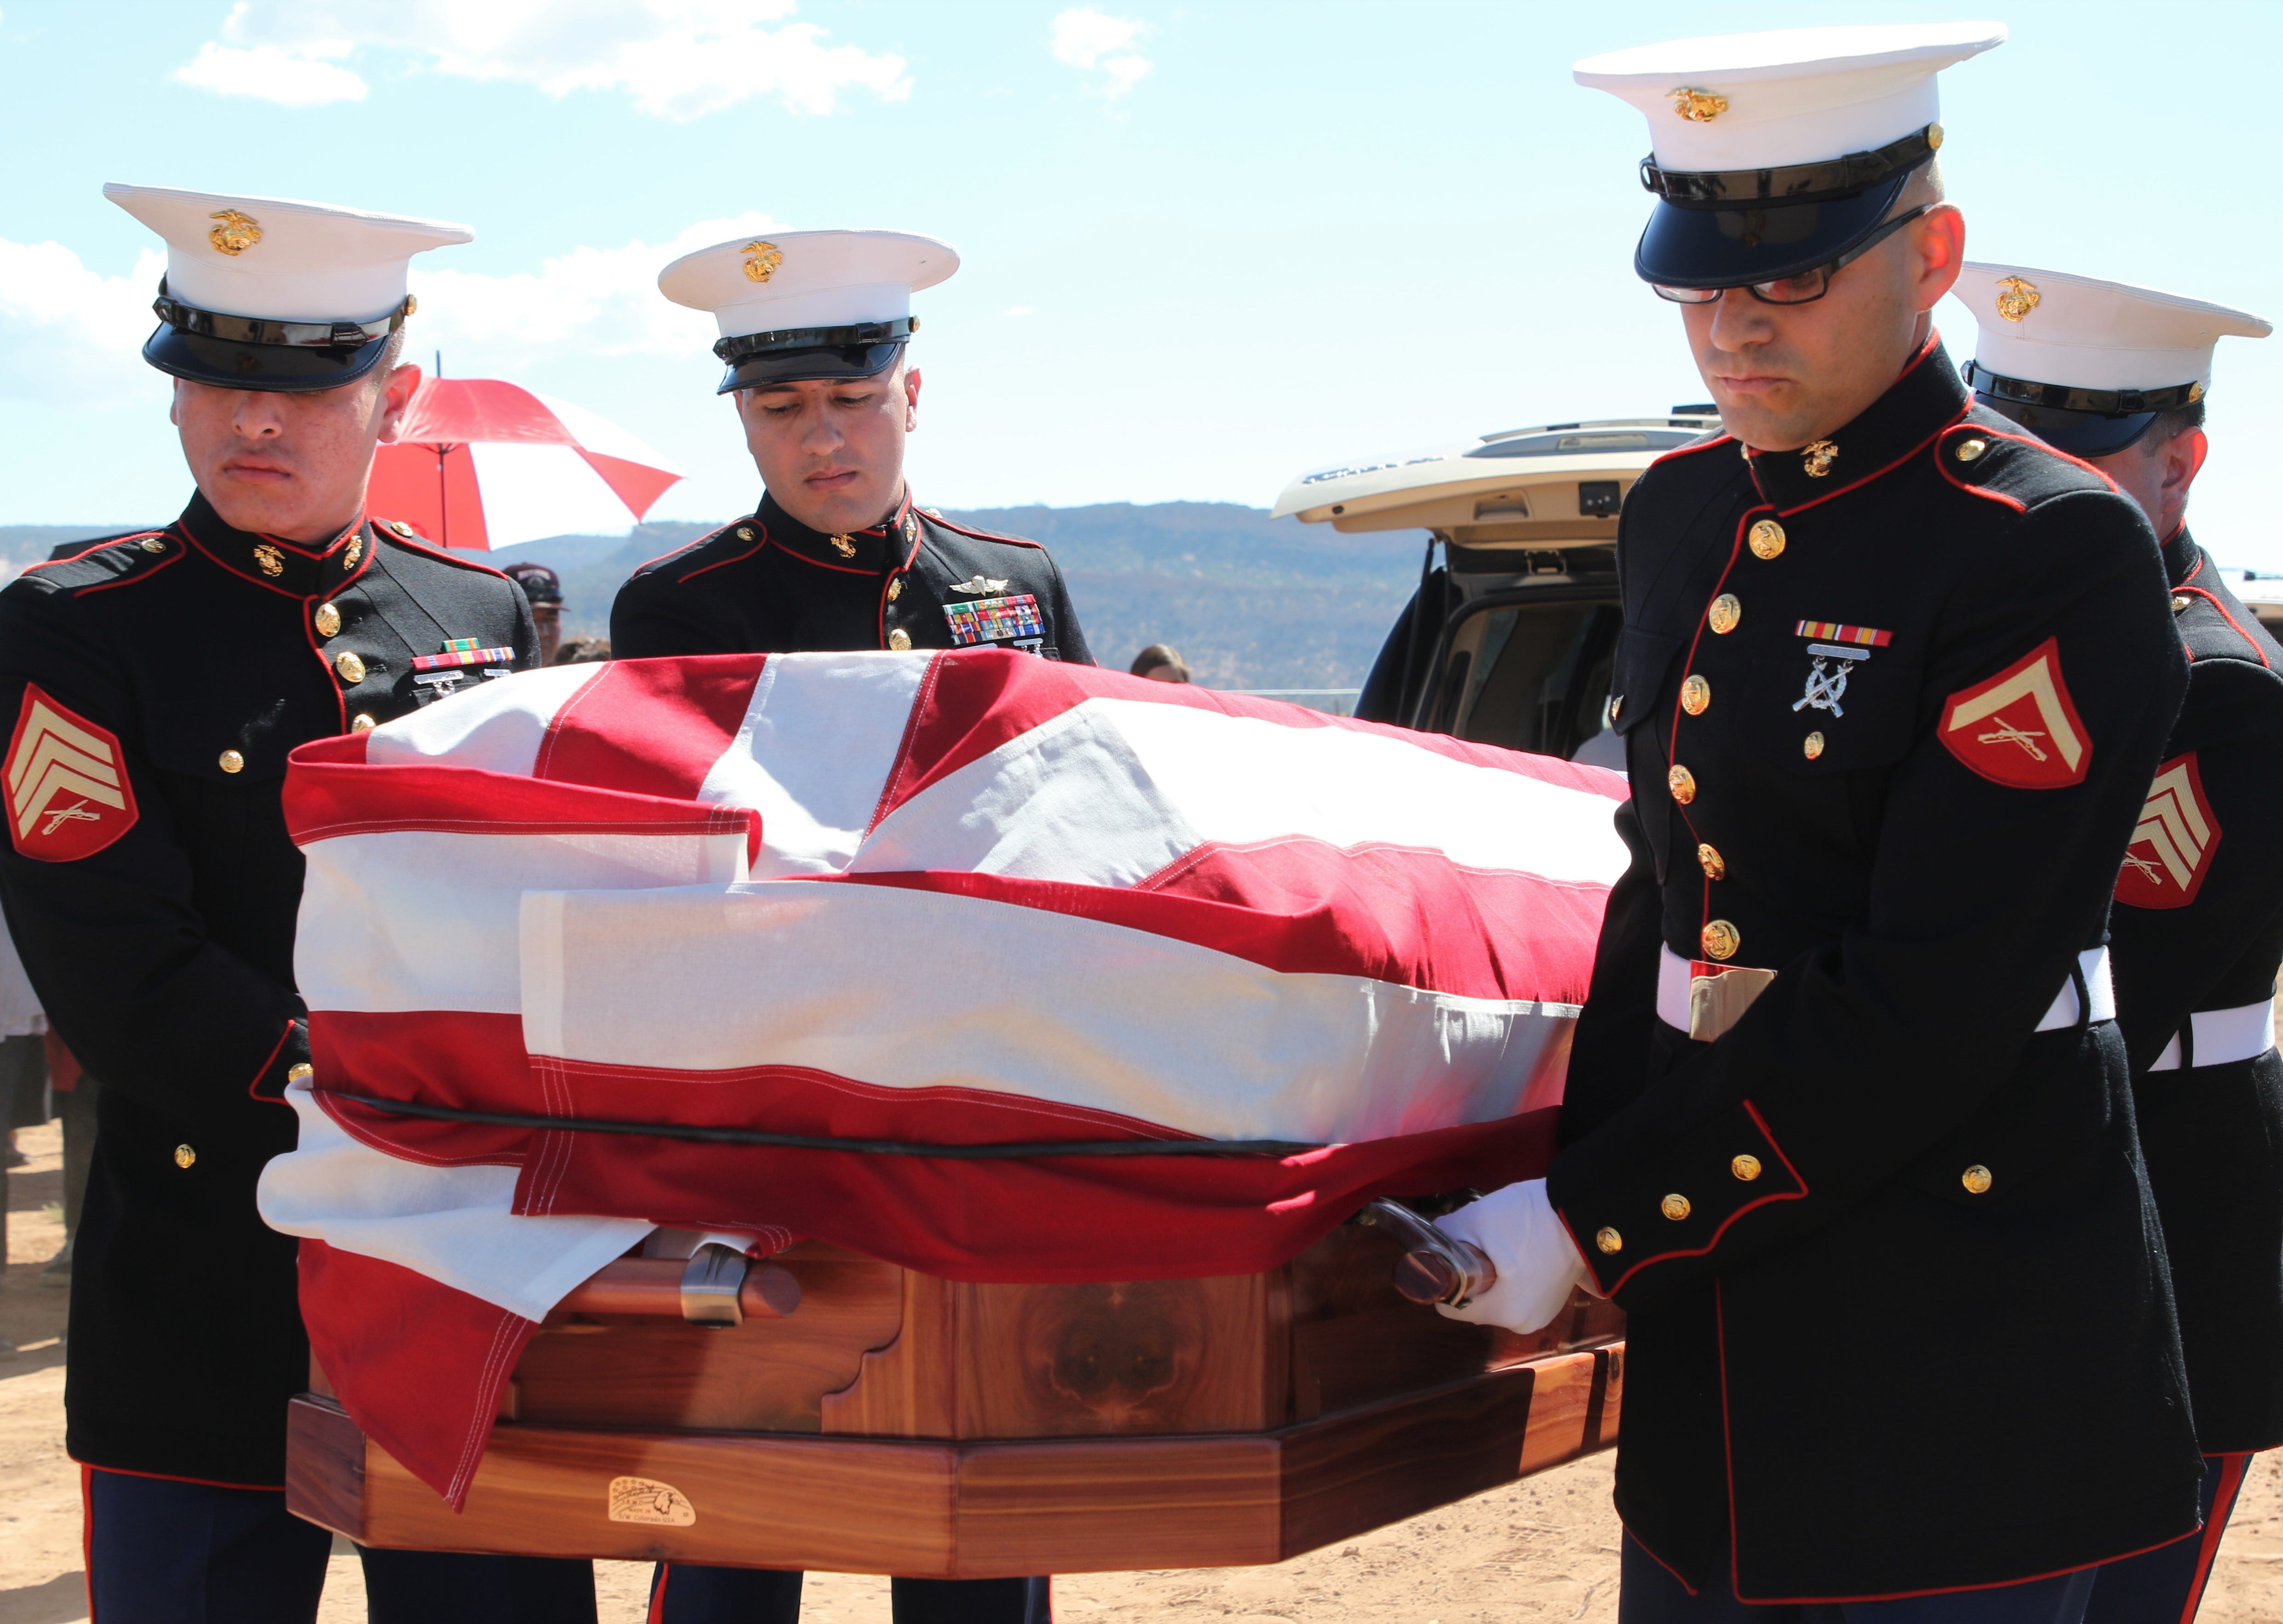 Members of the U.S. Marine Corps Delta Company, 4th Recon from Albuquerque carry the casket of Navajo Code Talker William Tully Brown Sr. on June 6 at the Fort Defiance Veterans Cemetery in Fort Defiance, Ariz.